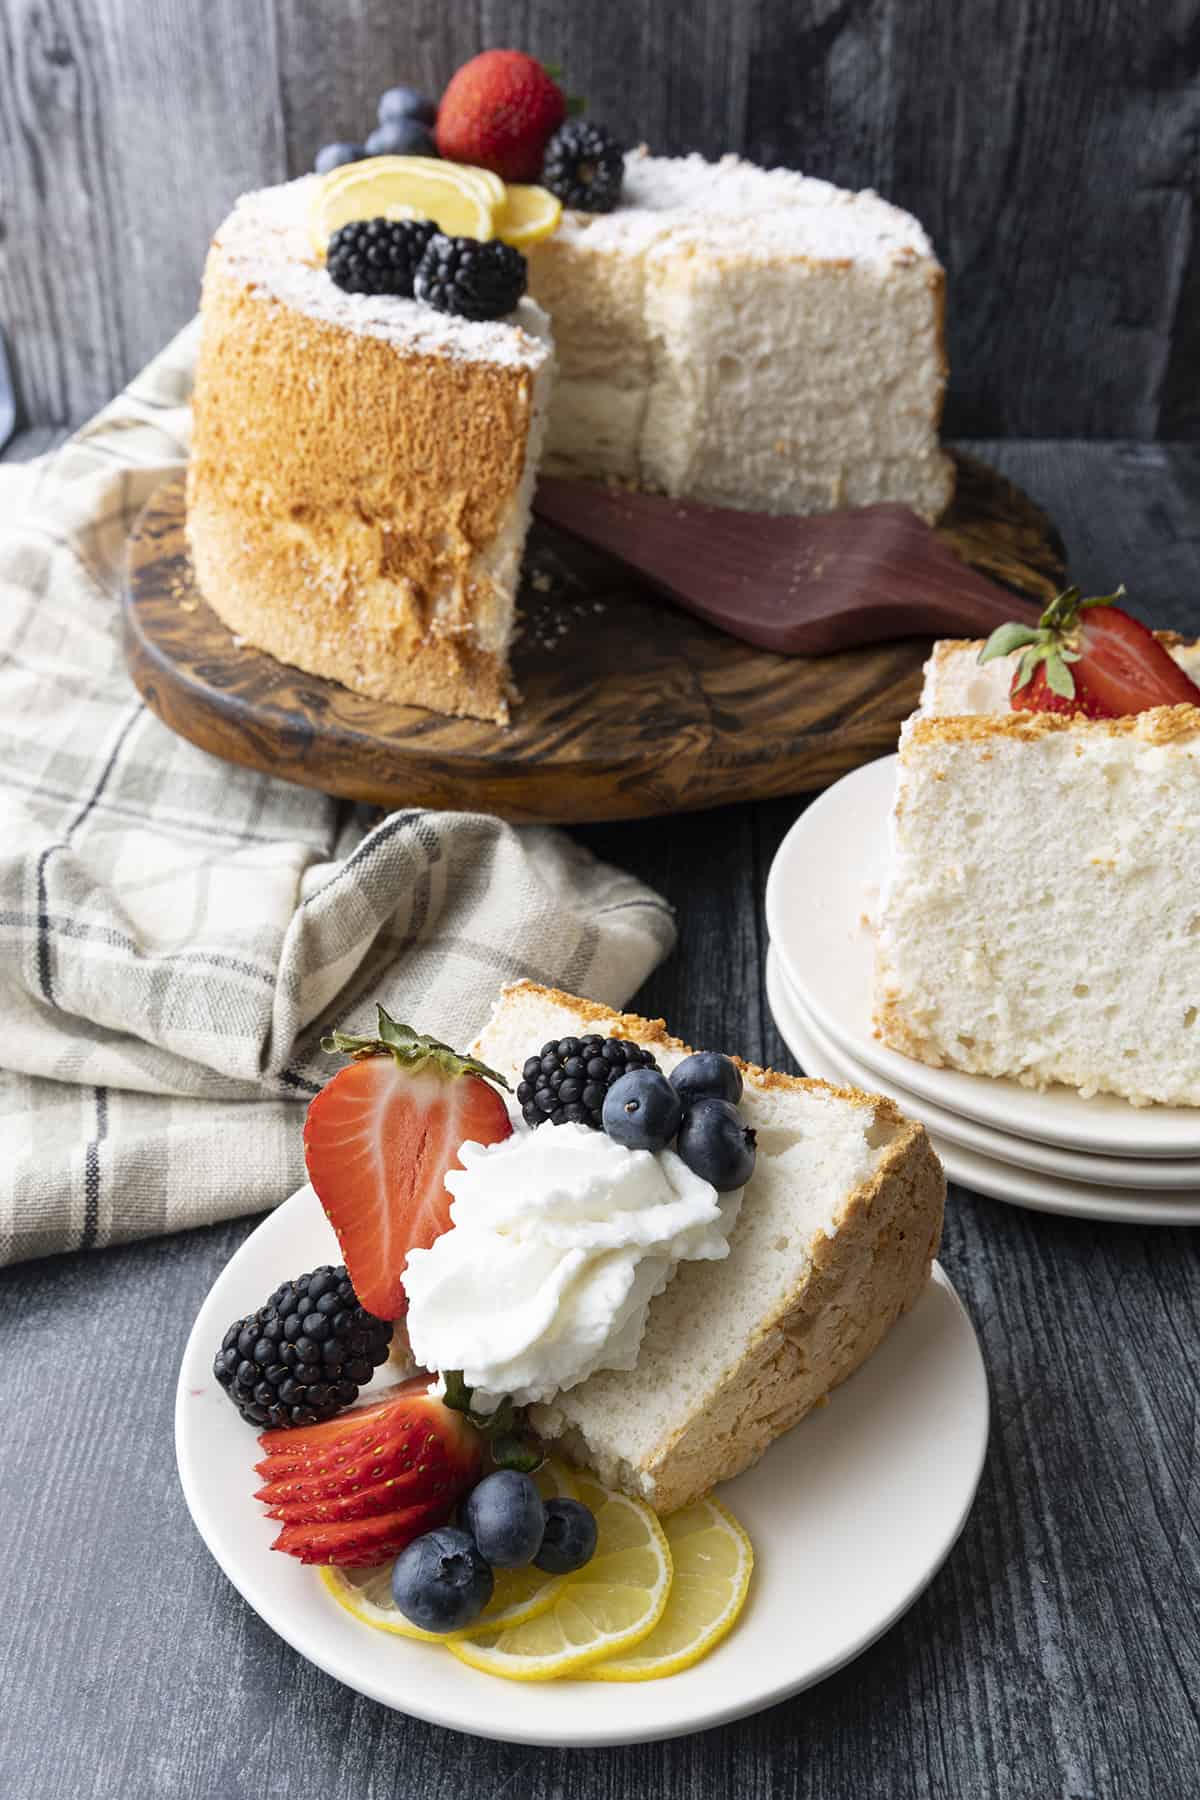 https://www.foodiewithfamily.com/wp-content/uploads/2022/07/angel-food-cake-1.jpg